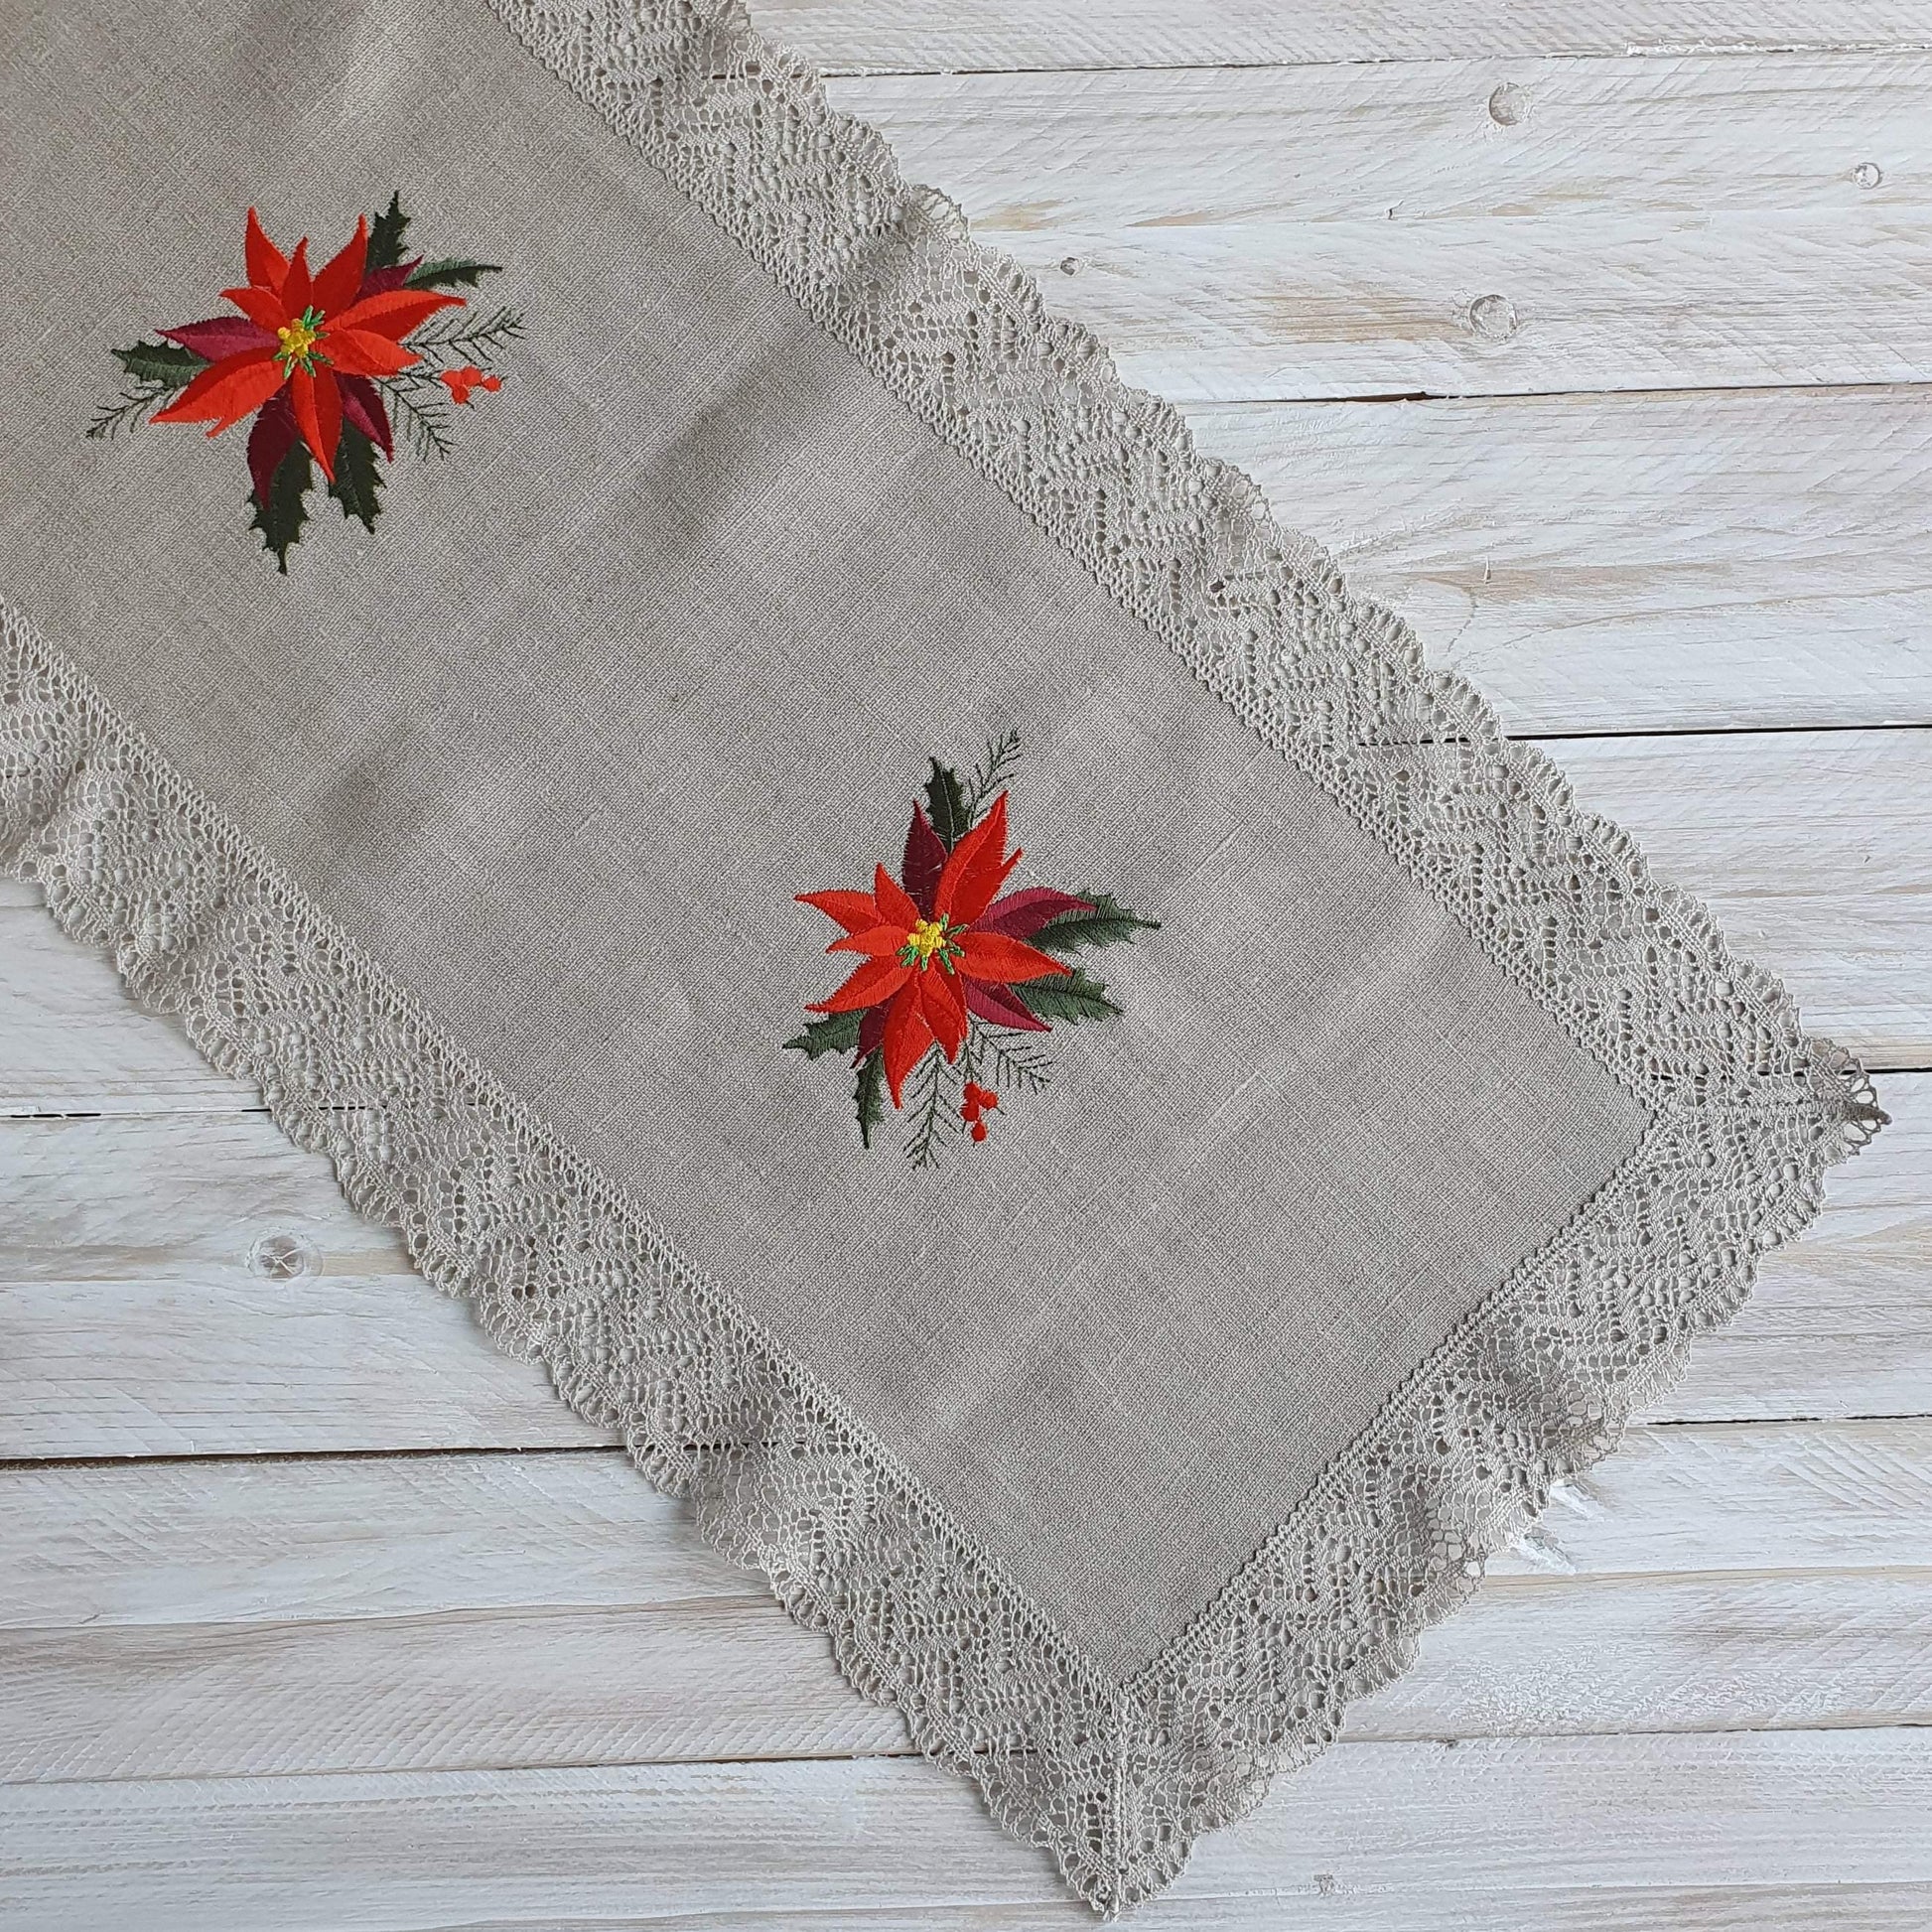 Table runner with lace CHRISTMAS FLOWER - Linen4me